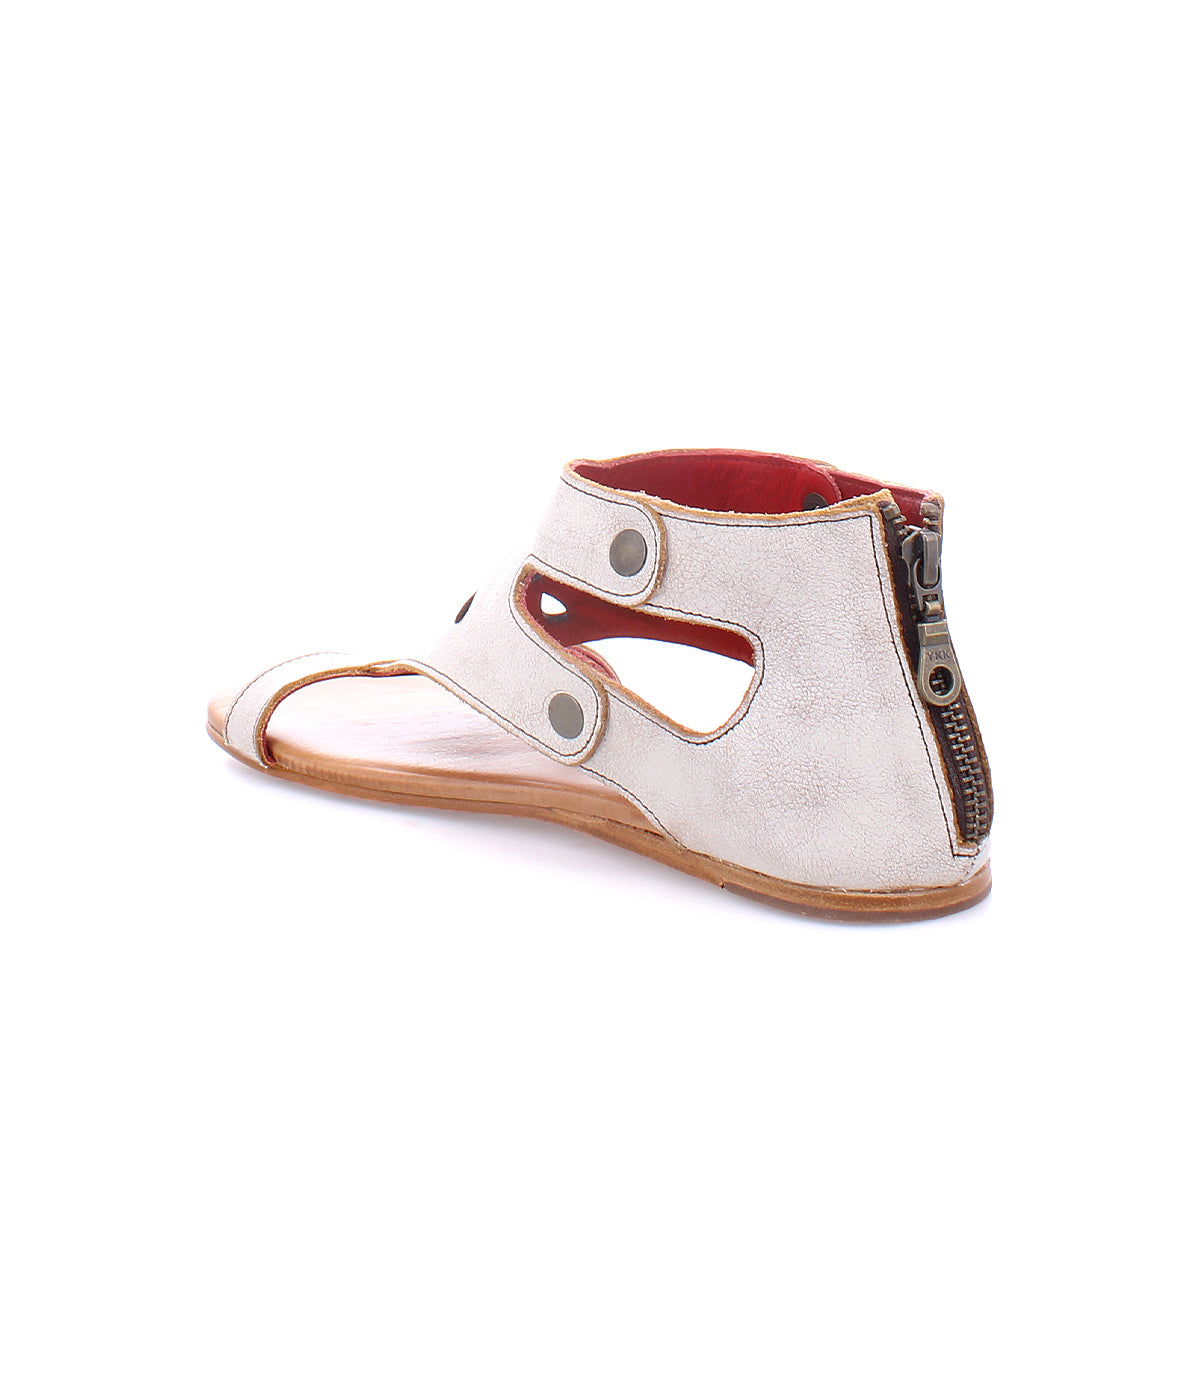 A pair of white Bed Stu Soto CW sandals with red detailing.